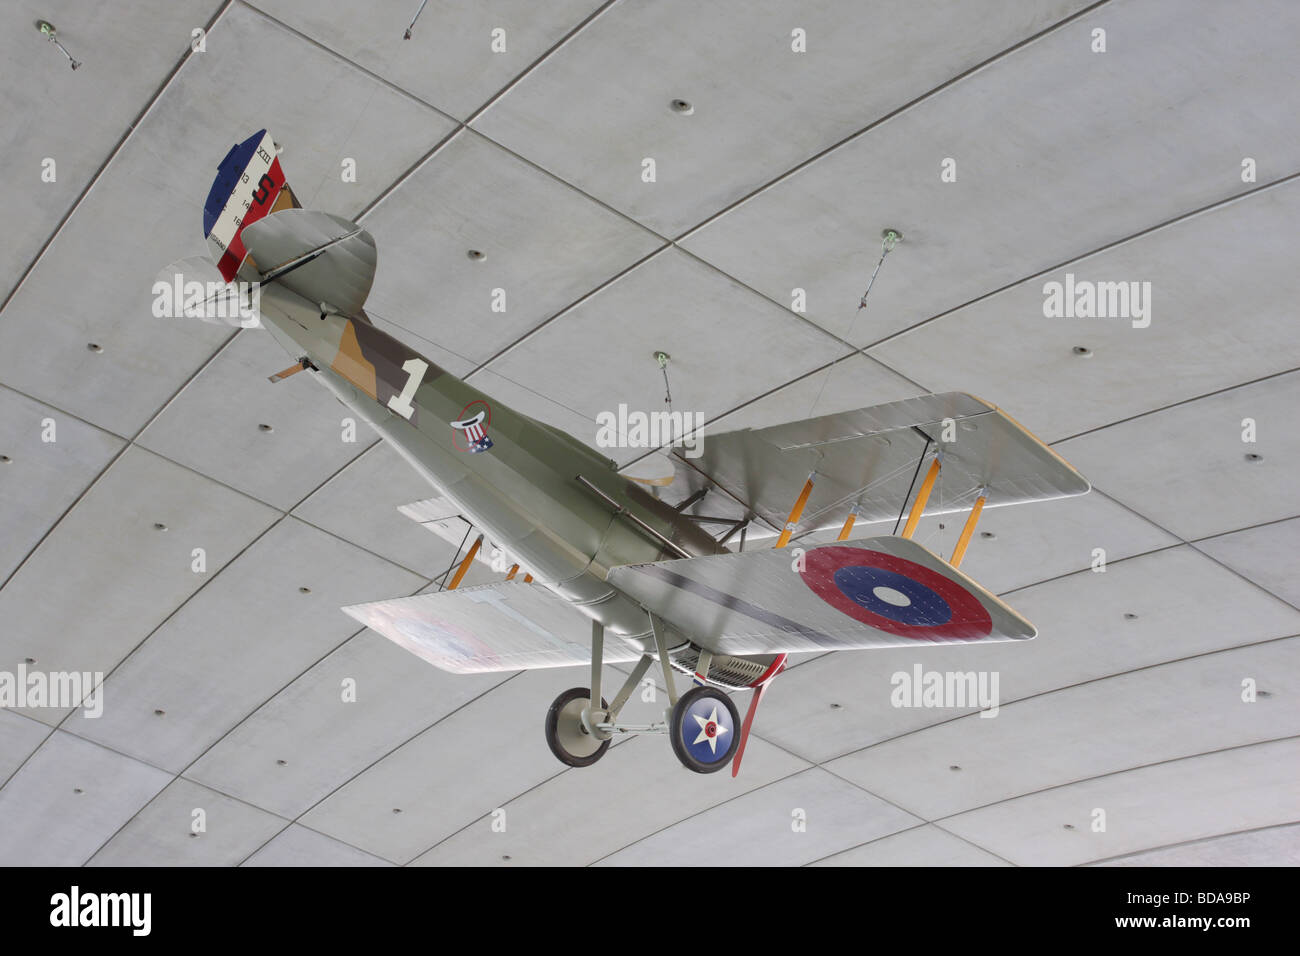 A fine reproduction of the Spad XIII biplane,currently on permanent display in the American Air Museum,IWM Duxford,England. Stock Photo